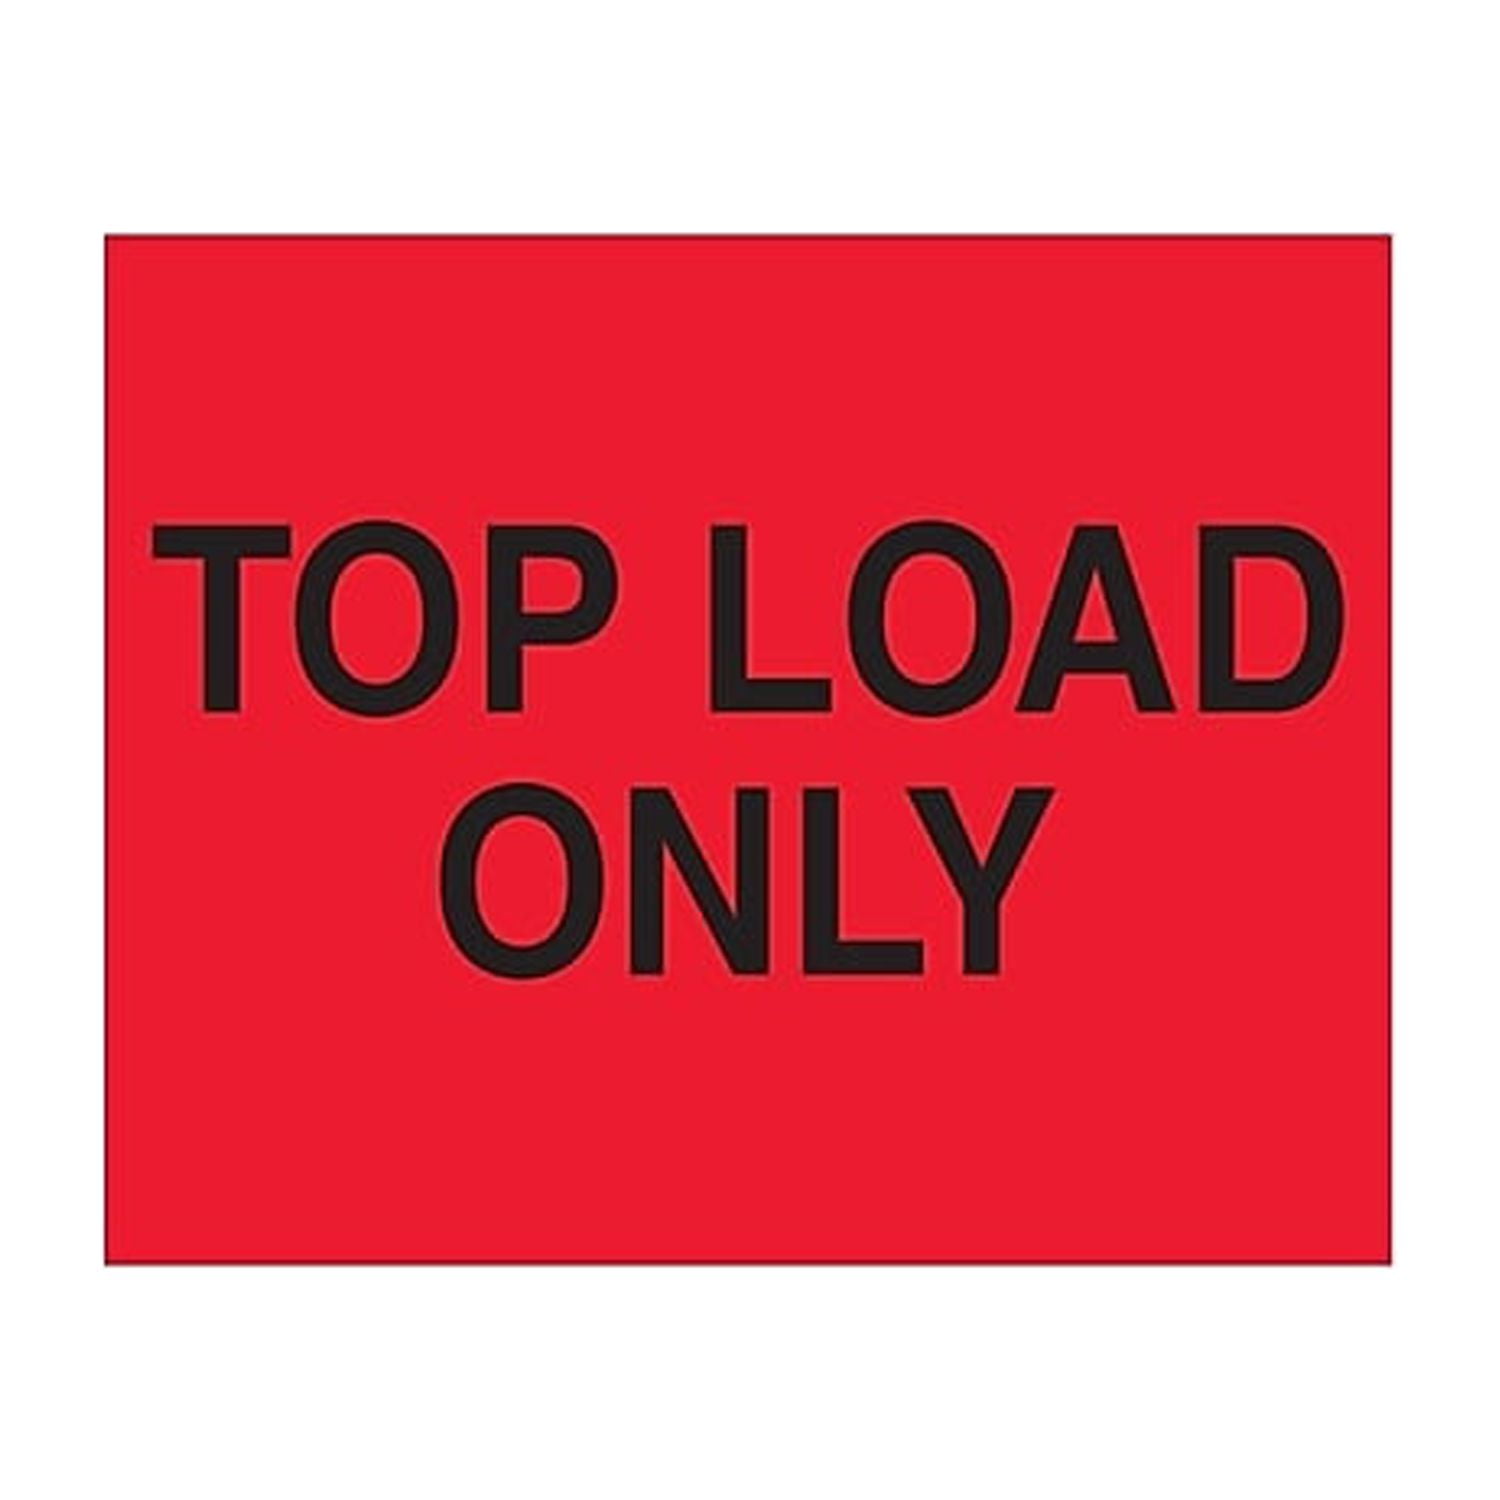 Dl1634 8 X 10 In. Top Load Only Labels, Fluorescent Red